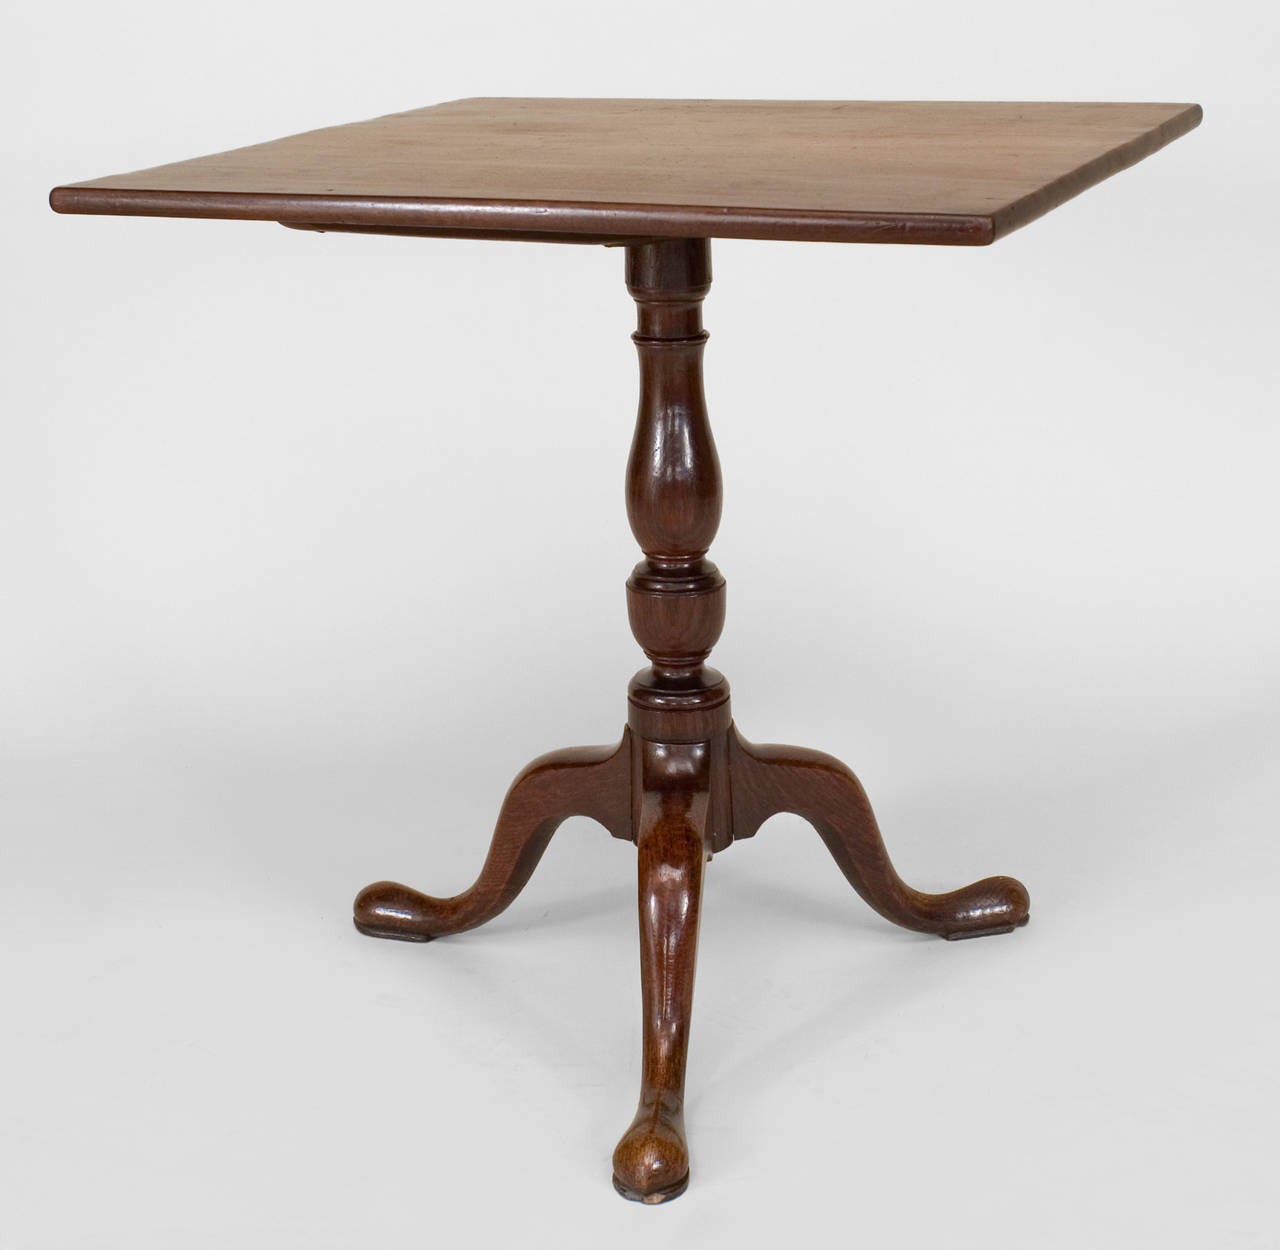 English Queen Anne-style (18th Century) mahogany pedestal base tilt top end table with a square top supported on 3 legs.
